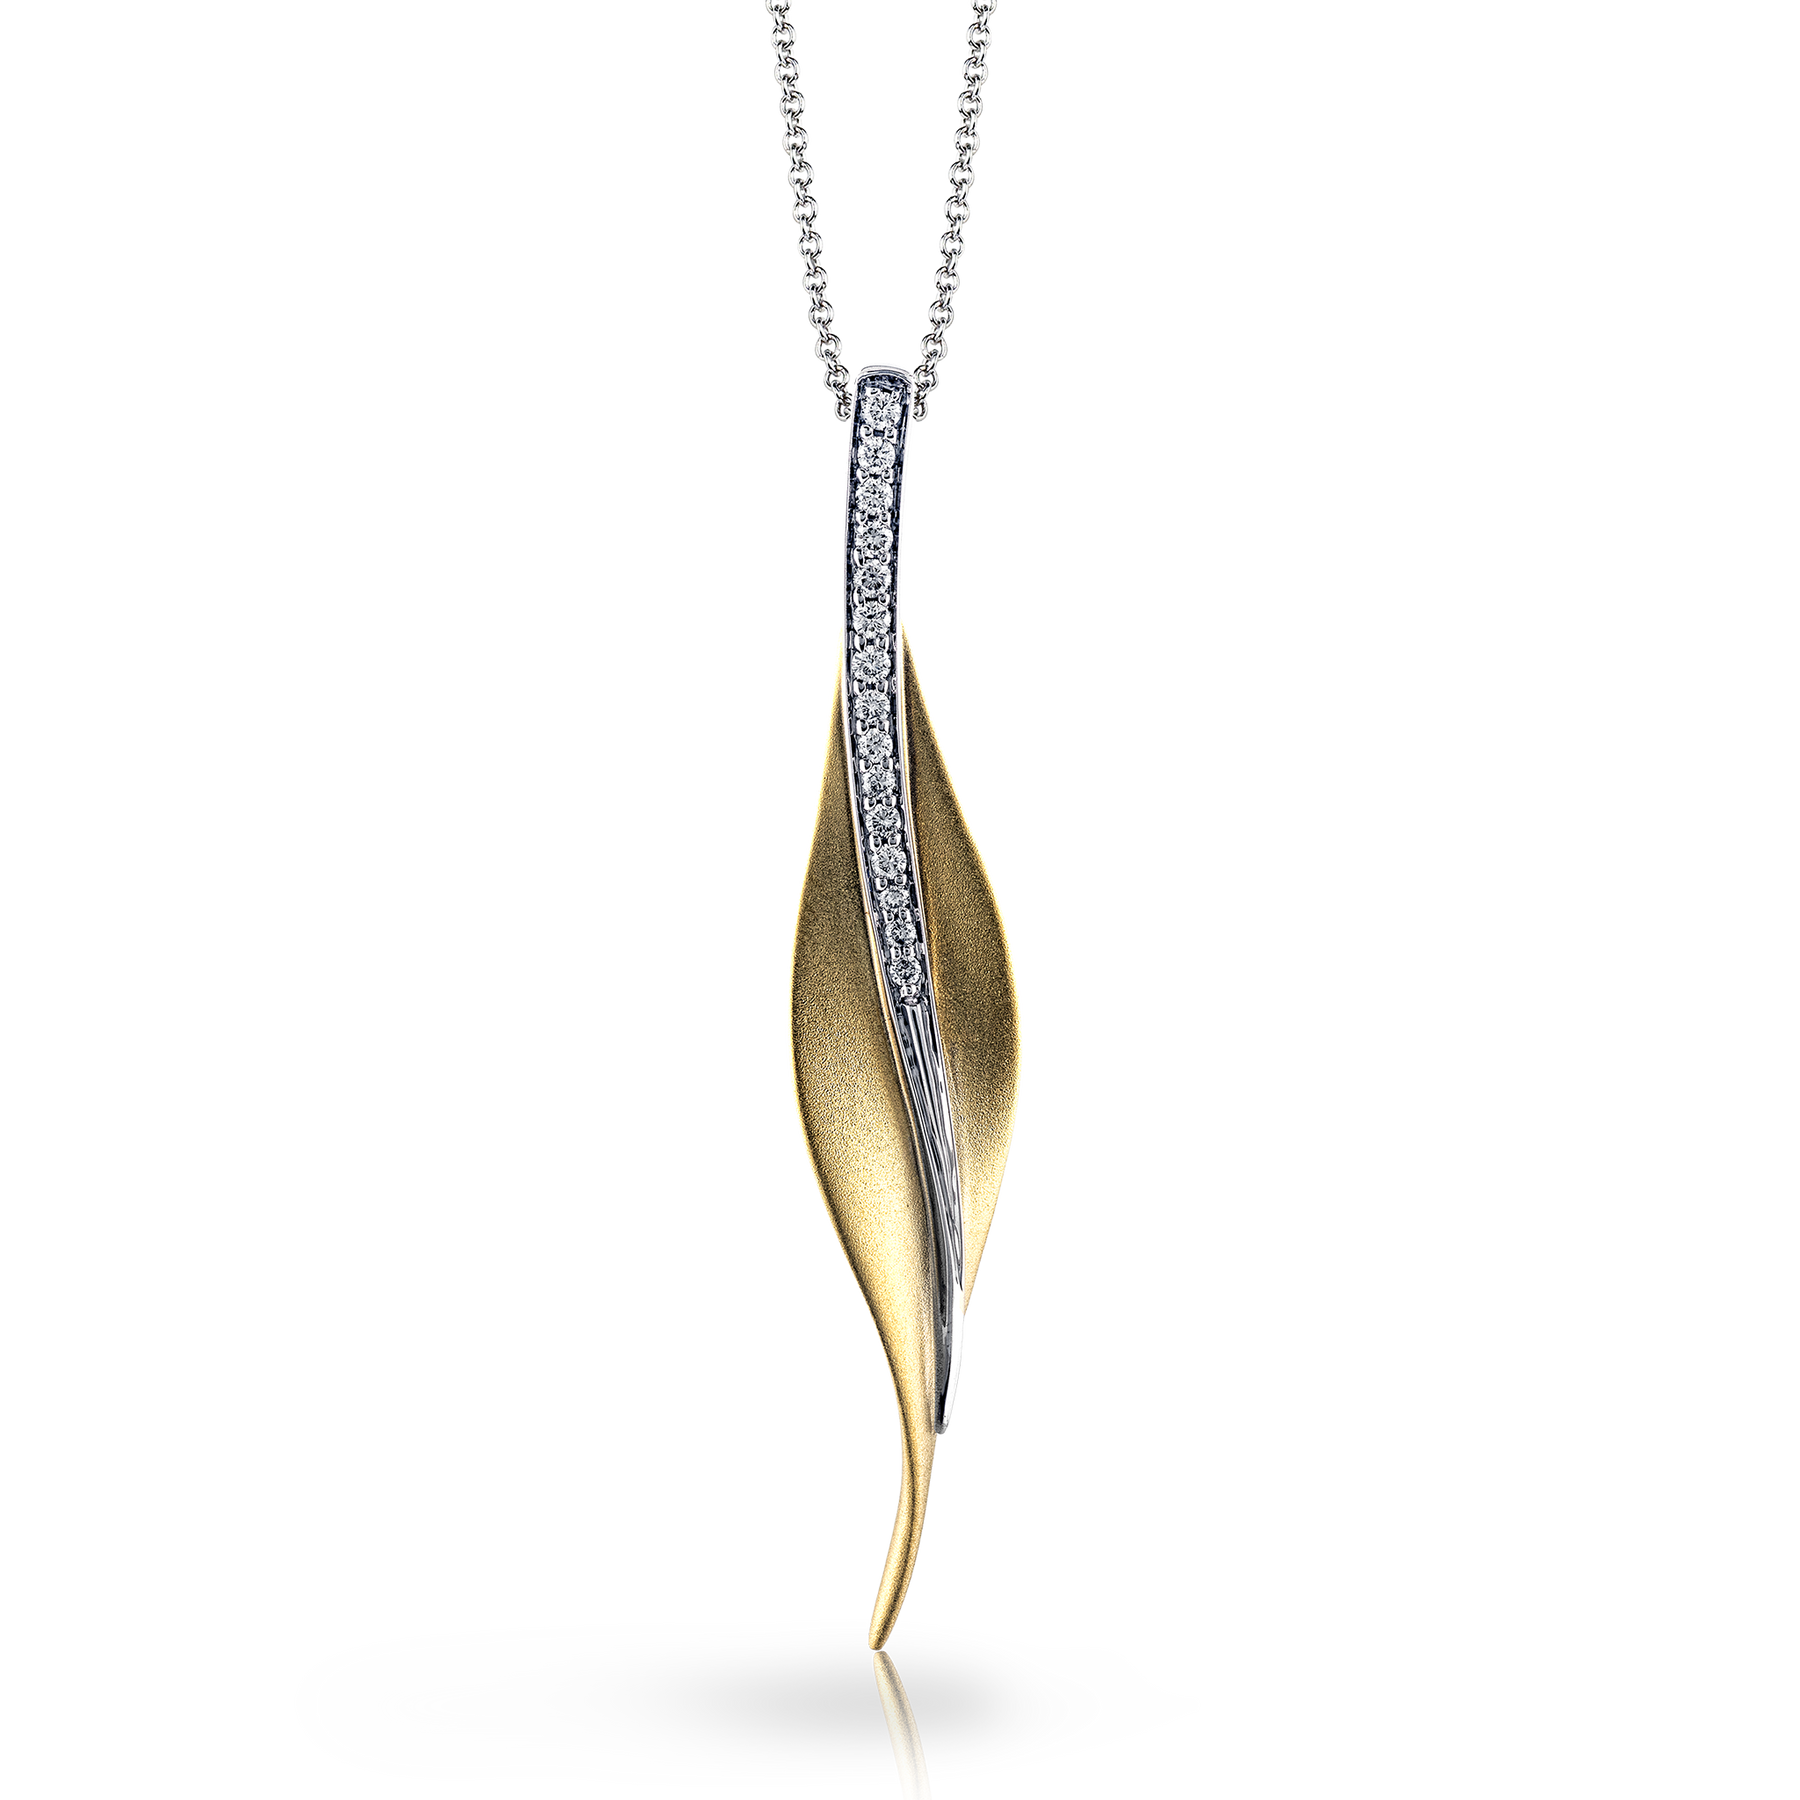 Fallen Leaves Pendant Necklace in 18k Gold with Diamonds DP113